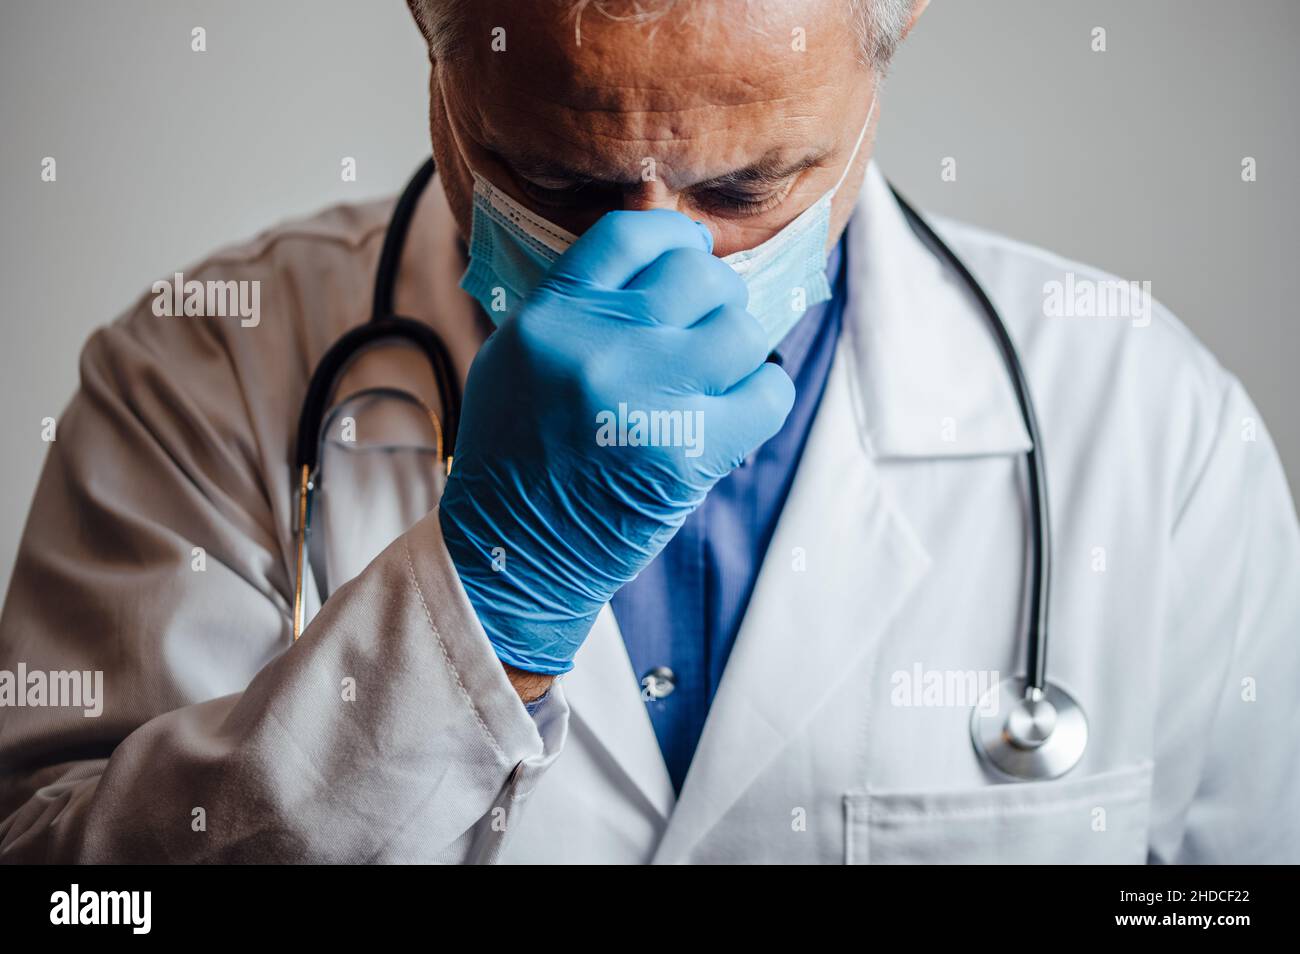 Stressed out and overworked doctor holding his nose bridge Stock Photo